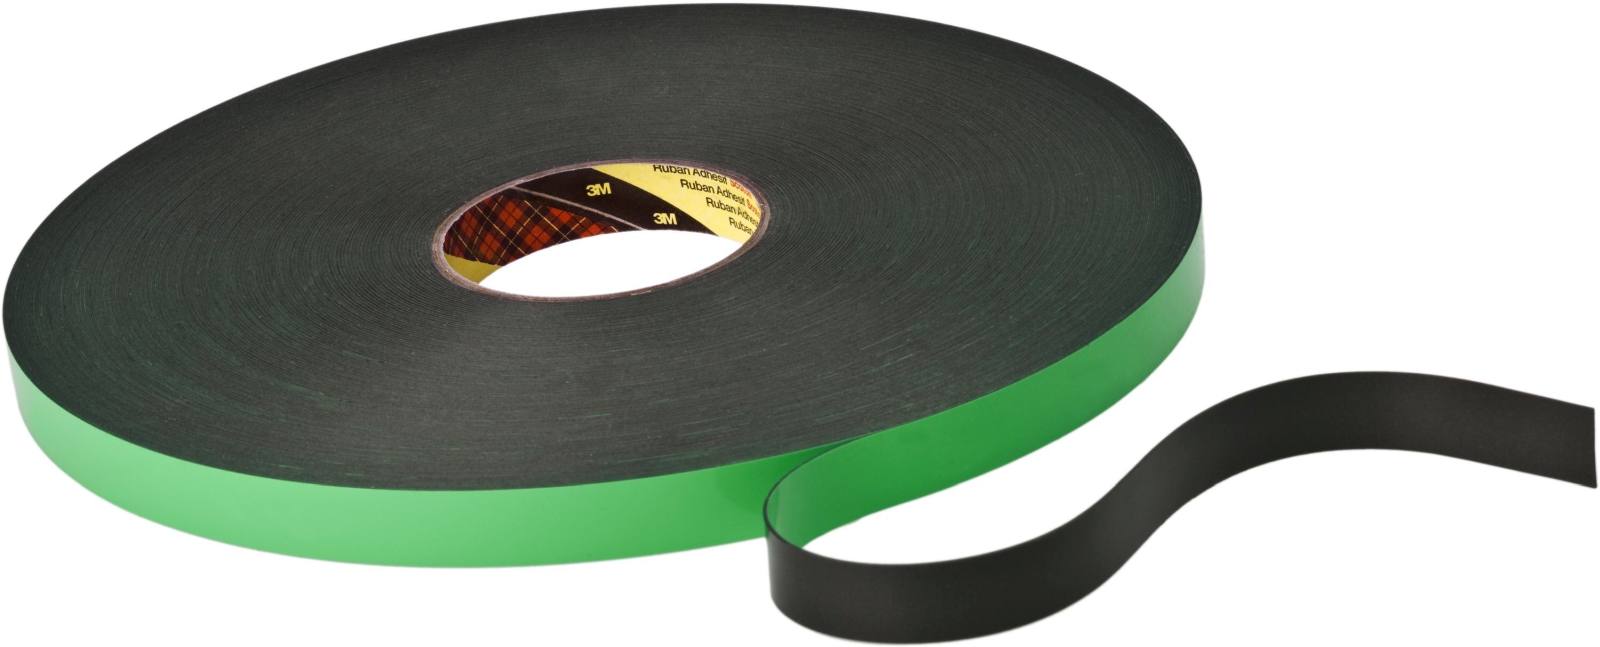 3M Double-sided PE foam tape with acrylic adhesive 9515B, black, 9 mm x 33 m, 1.5 mm